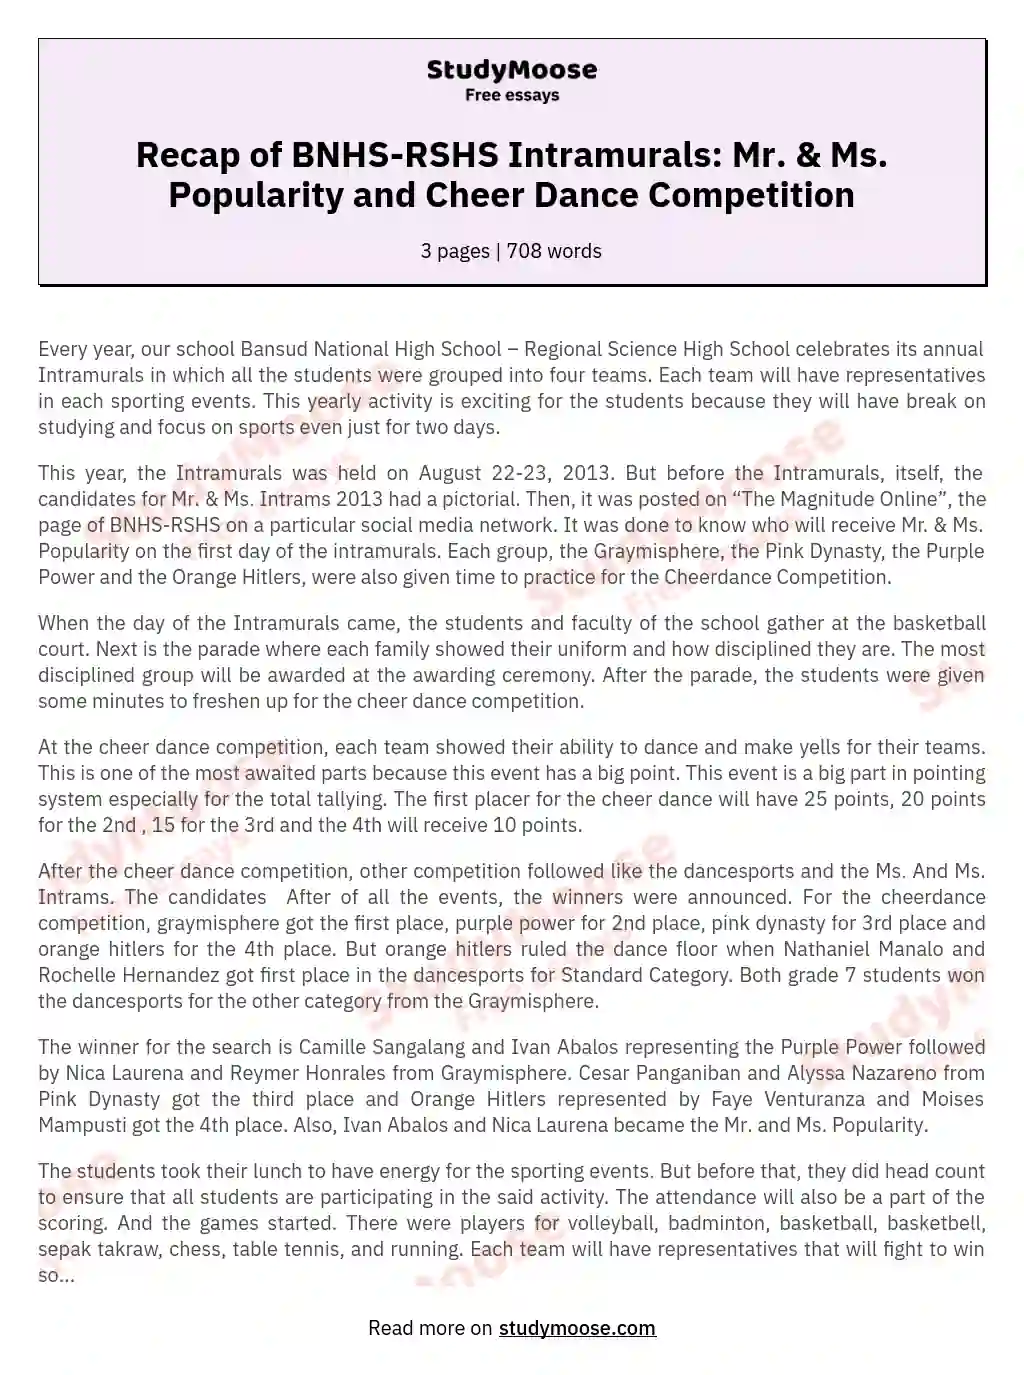 Recap of BNHS-RSHS Intramurals: Mr. & Ms. Popularity and Cheer Dance Competition essay